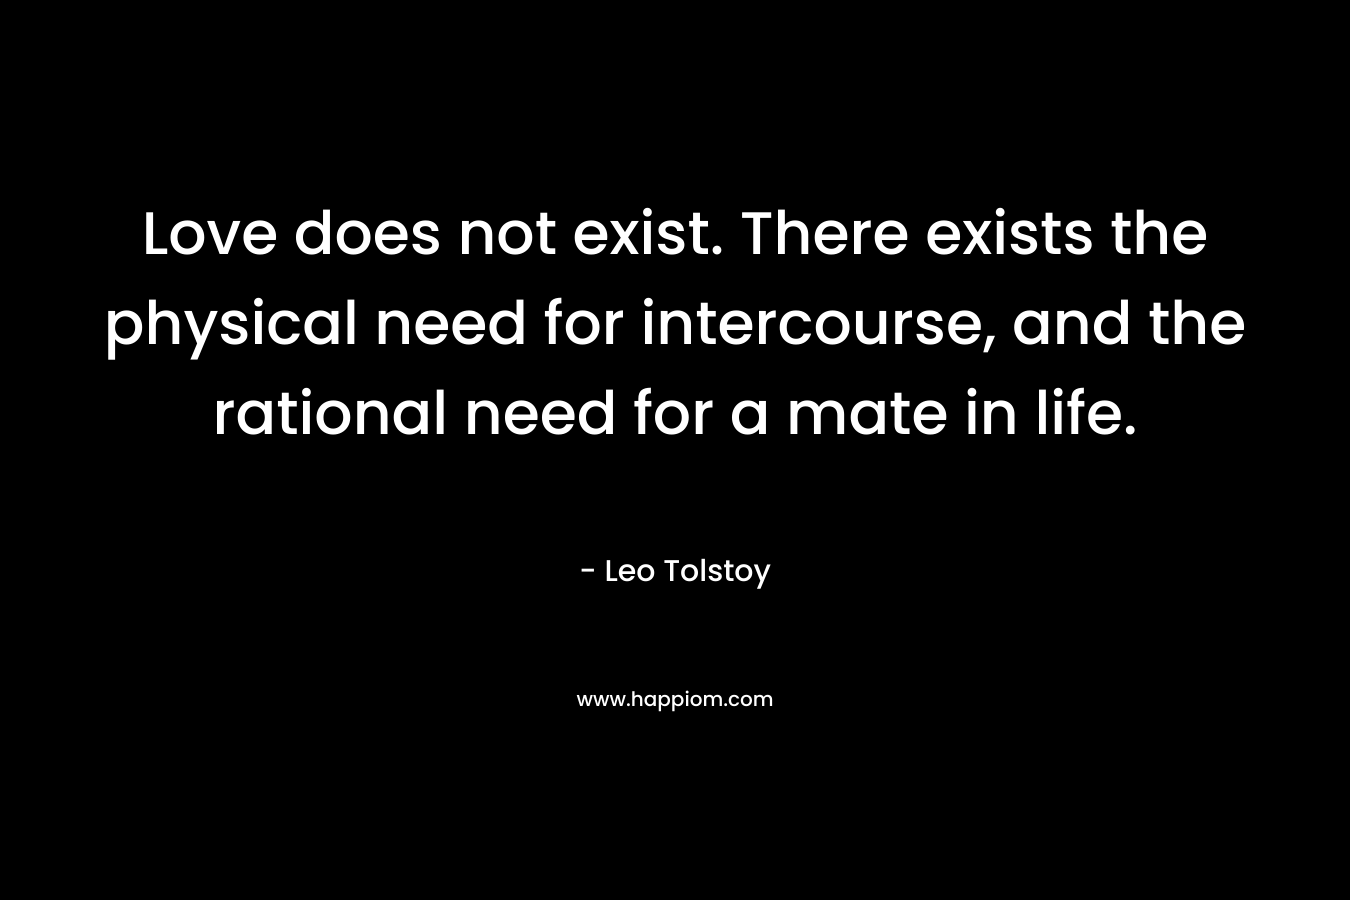 Love does not exist. There exists the physical need for intercourse, and the rational need for a mate in life. – Leo Tolstoy